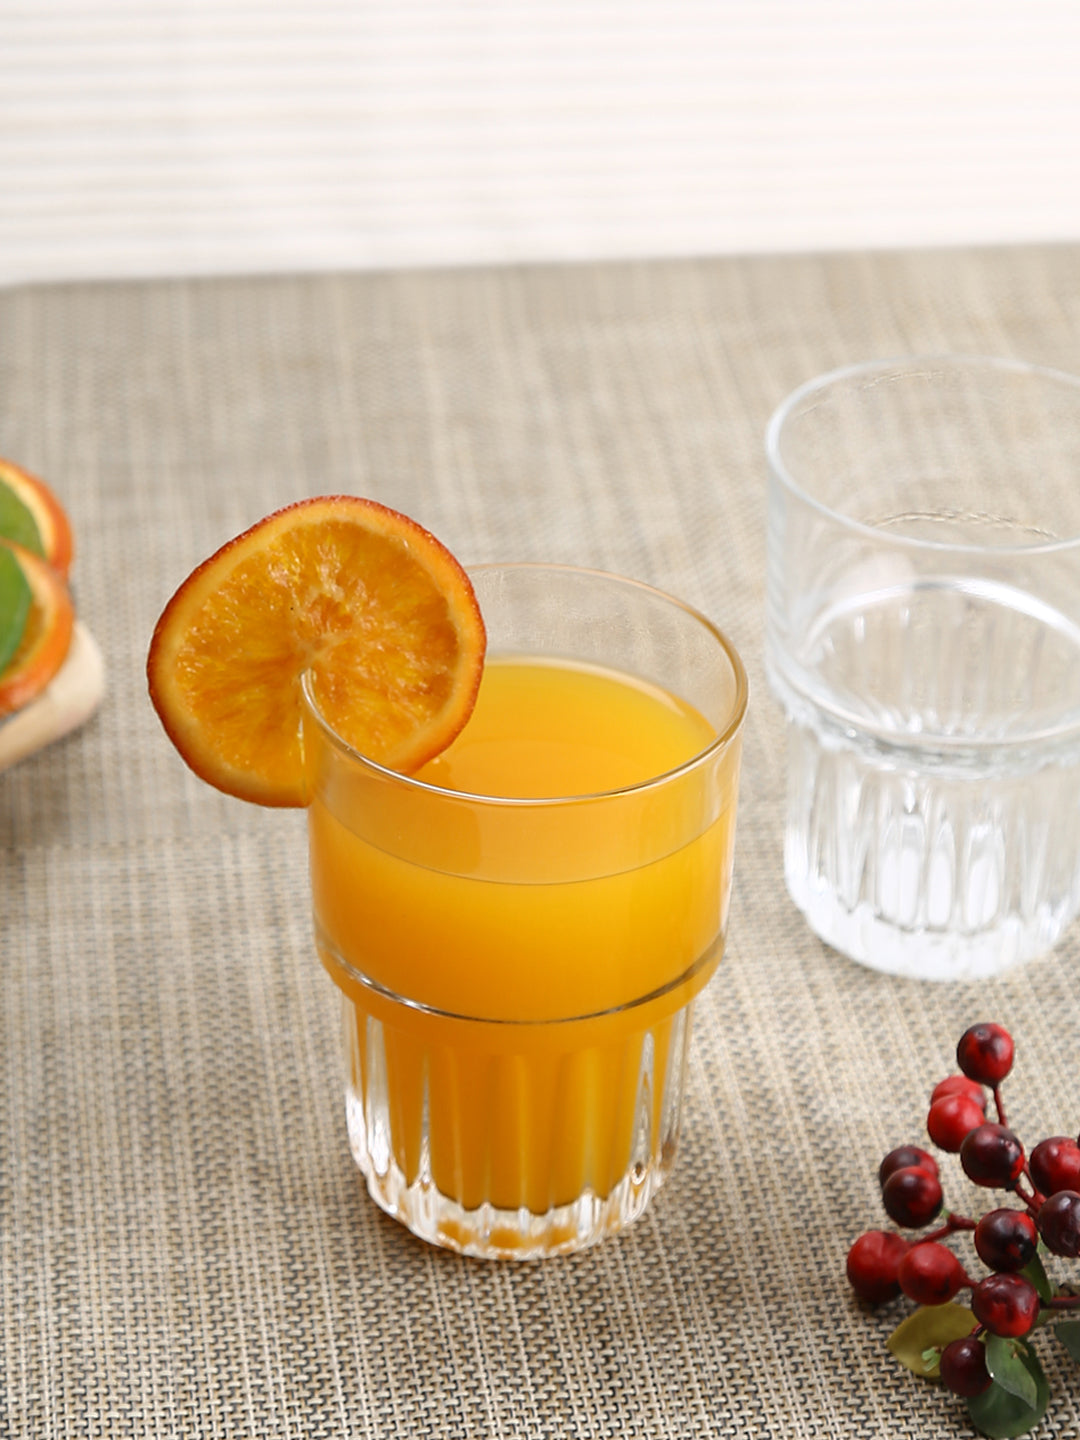 High-Quality Juice Glasses - Add elegance to your table.